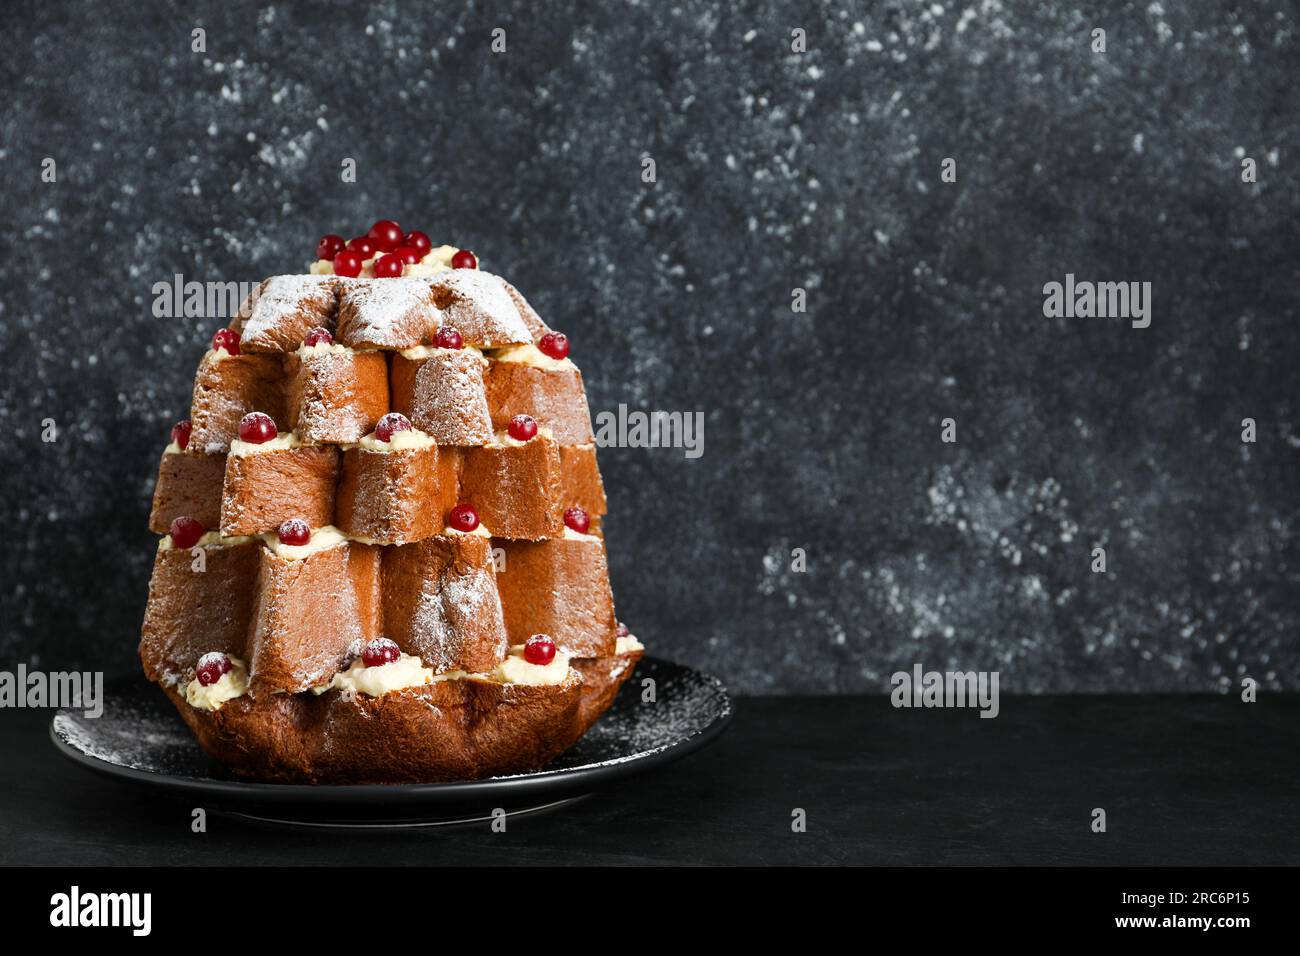 https://c8.alamy.com/comp/2RC6P15/delicious-pandoro-christmas-tree-cake-with-powdered-sugar-and-berries-on-black-table-space-for-text-2RC6P15.jpg